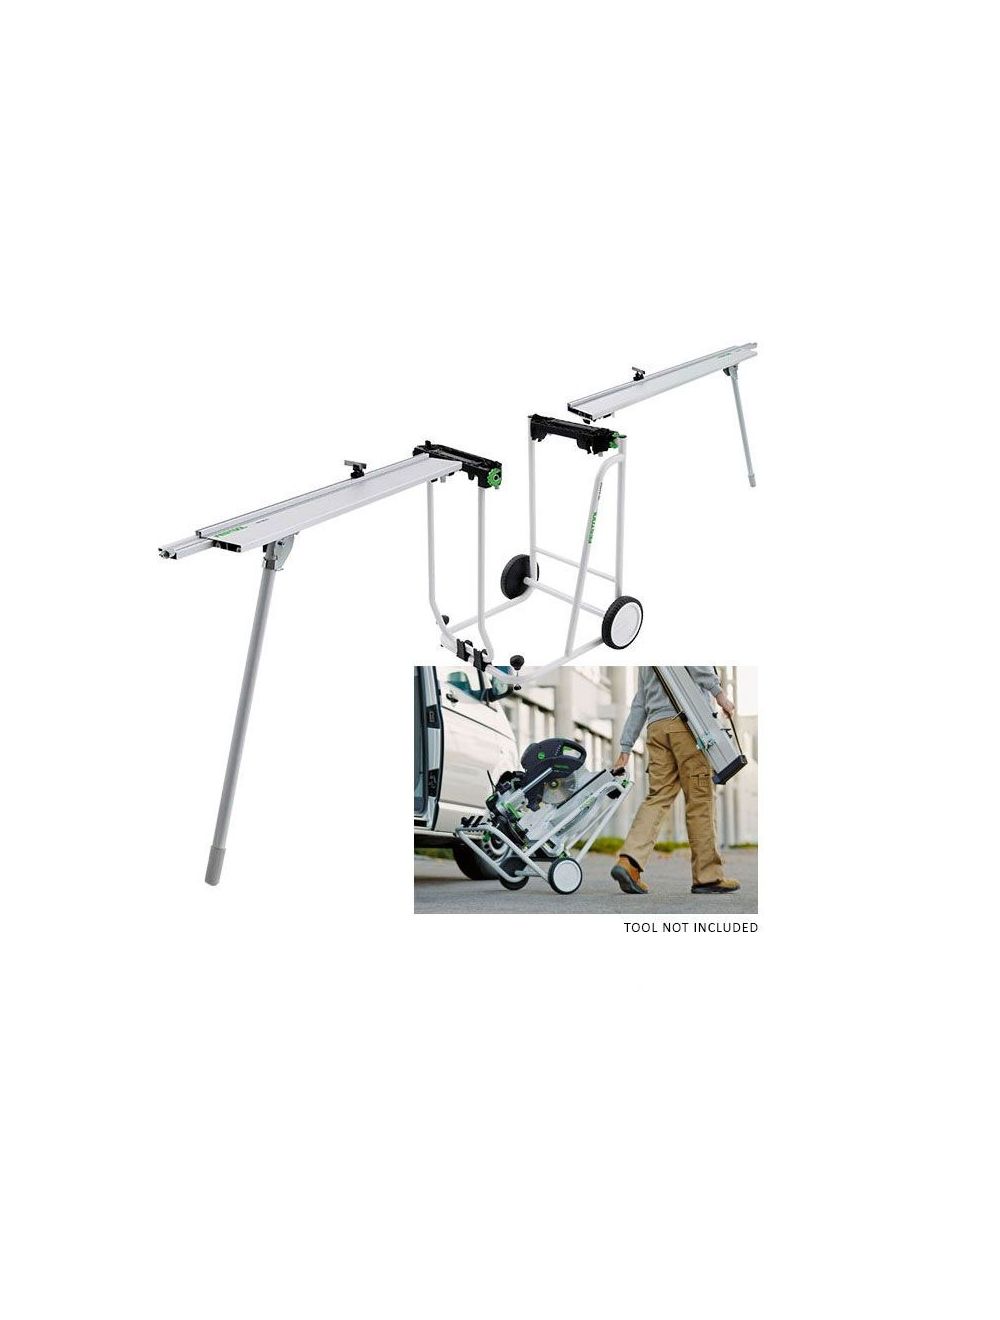 Festool Kapex Mobile Work Stand 497354 From Tools For Schools.